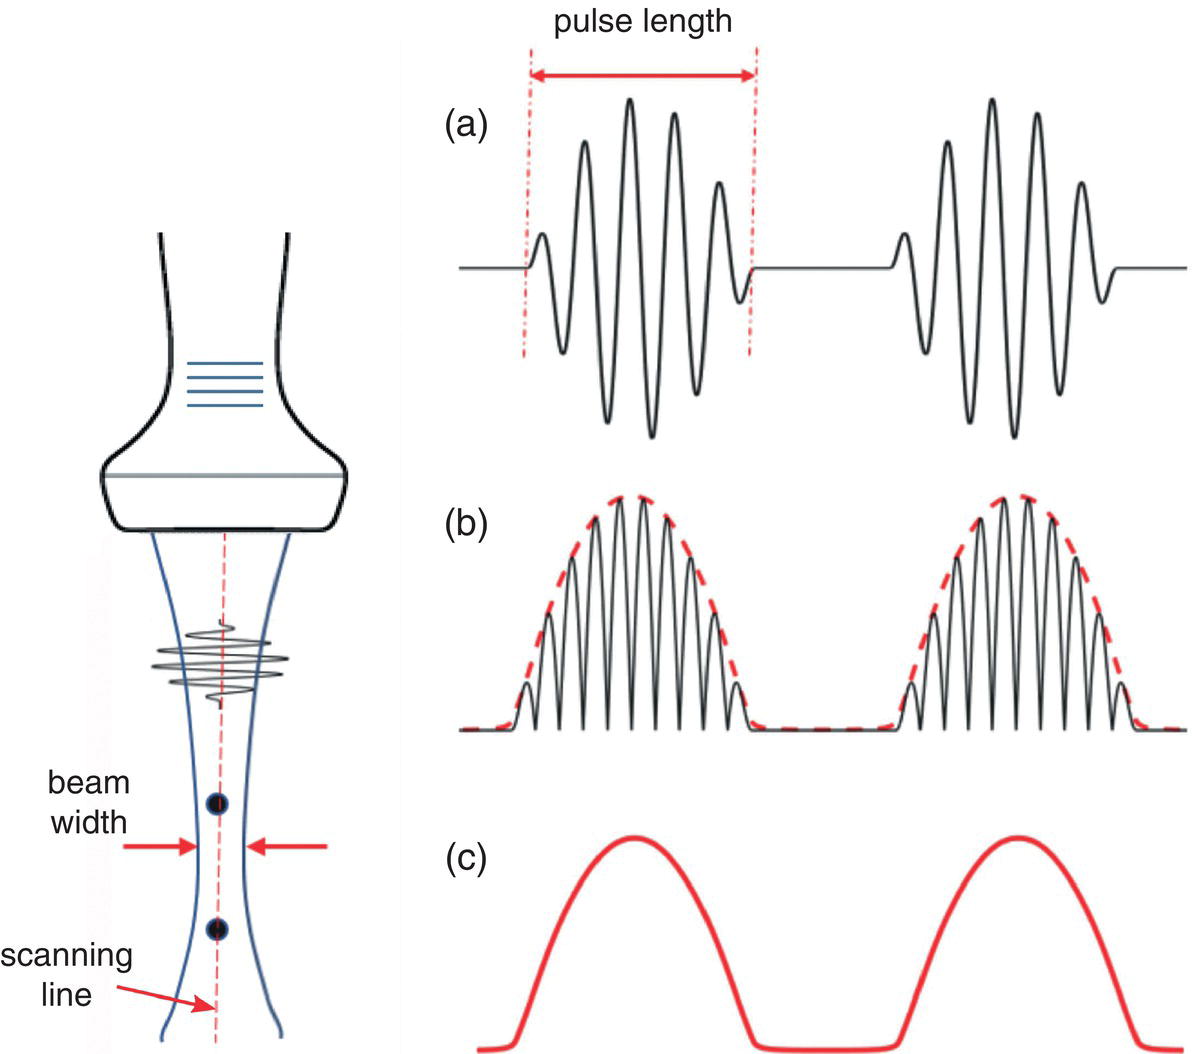 A schematic diagram contains the following. a. Two parallel waves with pulse length. b. The amplitude modulated sign wave. c. The extracted envelope for the image display. A pulsed ultrasound beam to image two point sources along one scanning line on the left.